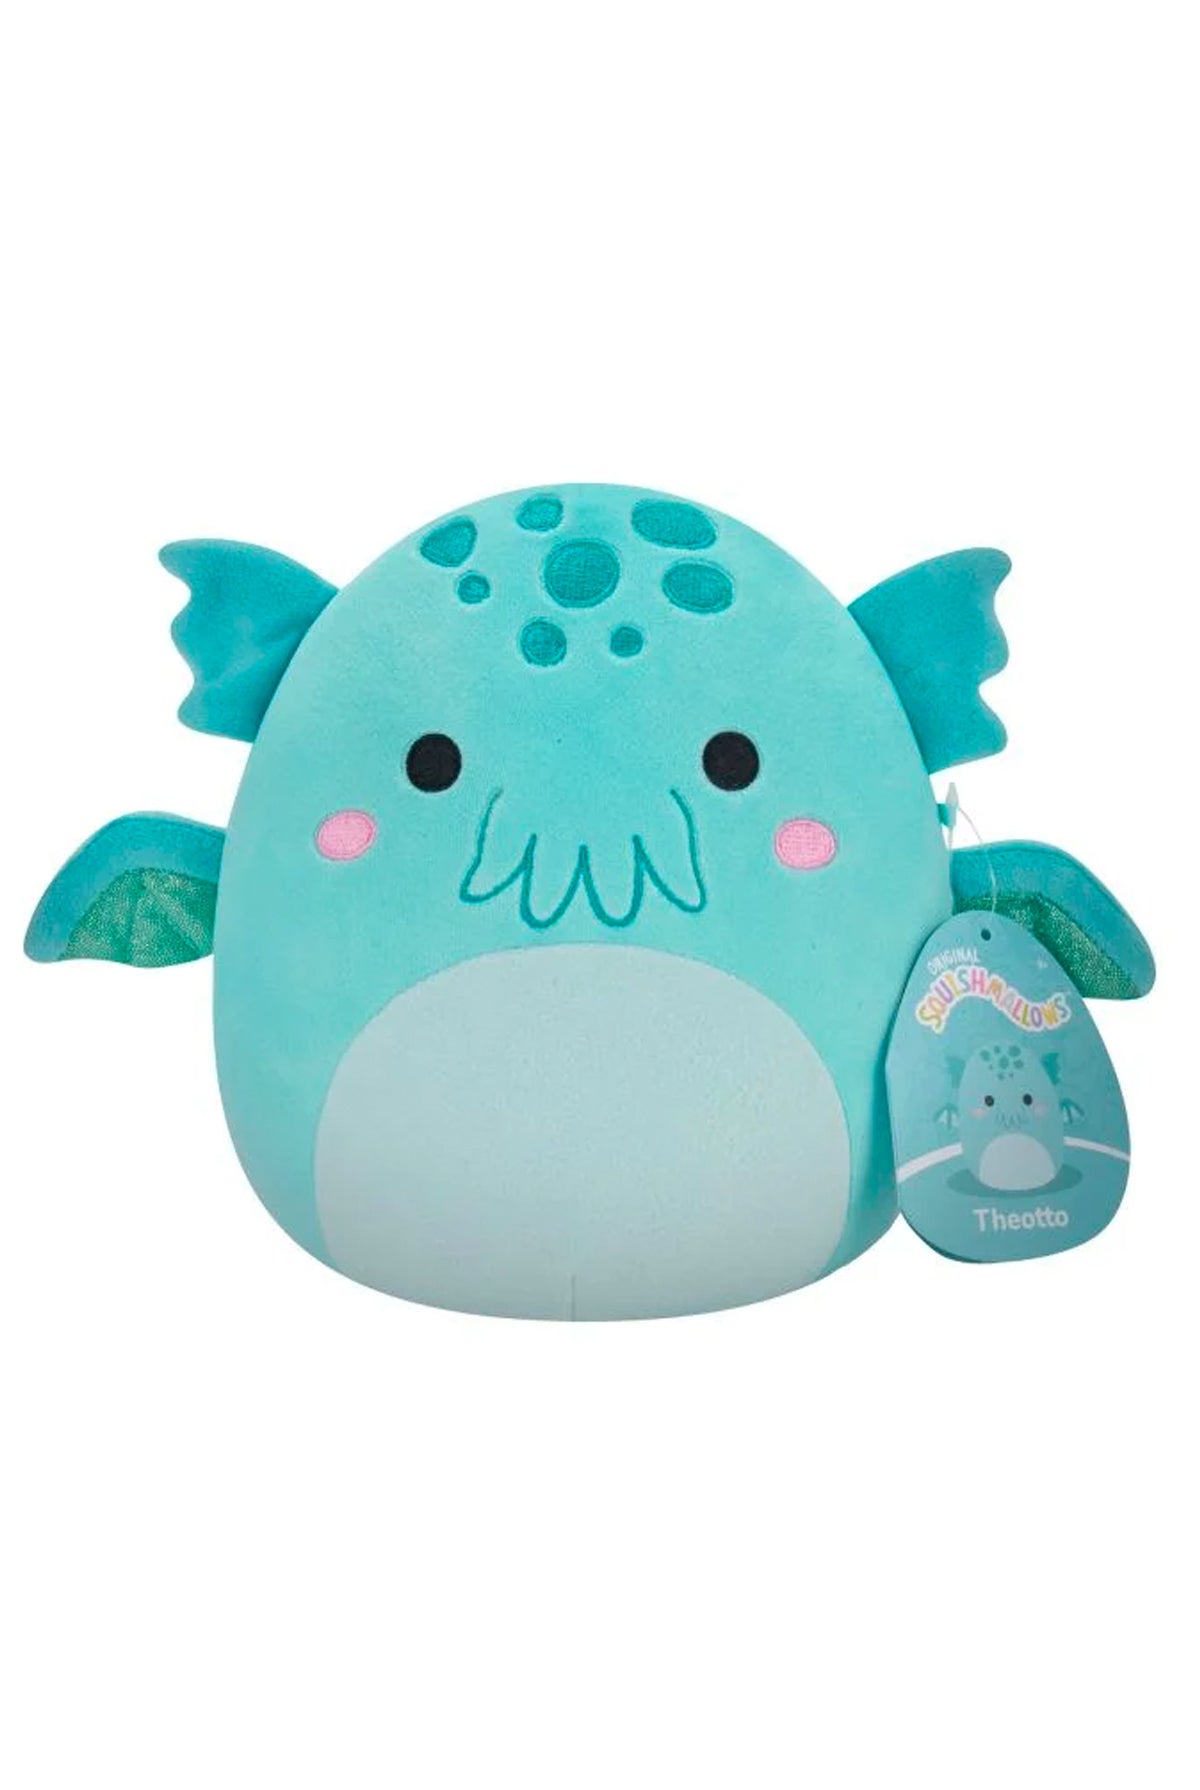 Squishmallows Theotto the Cthulu